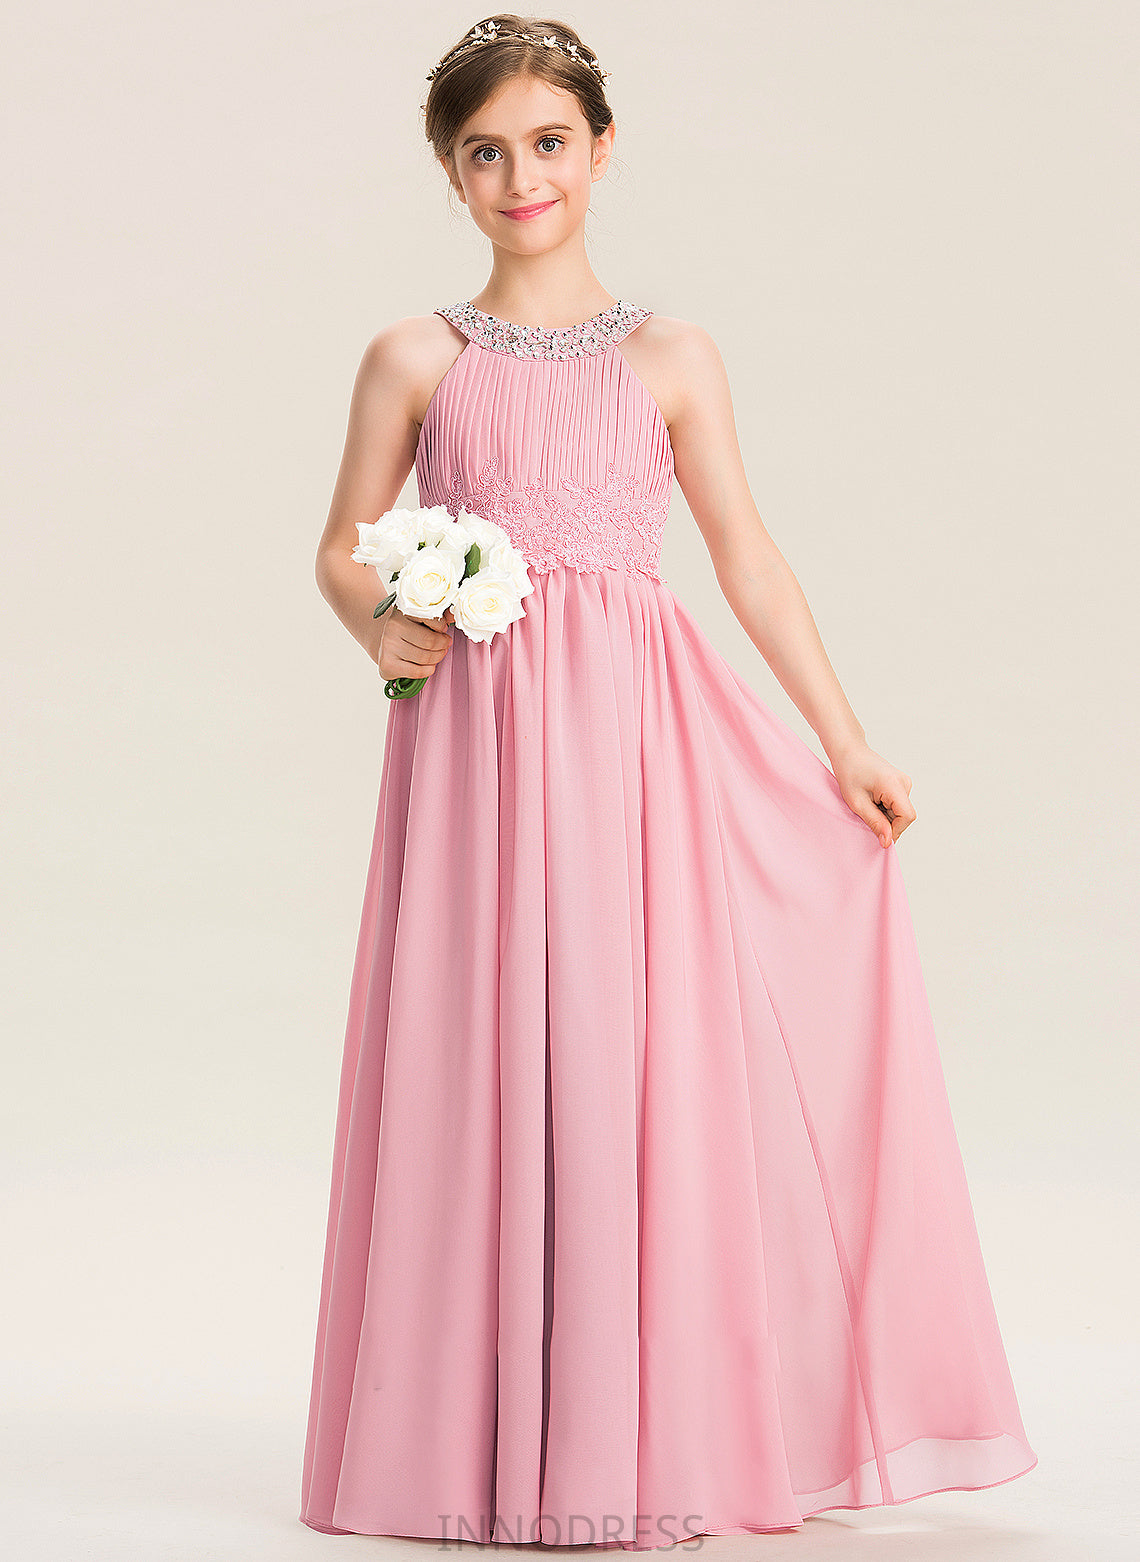 Mallory Neck Sequins Beading Lace Scoop Ruffle With Chiffon Junior Bridesmaid Dresses A-Line Floor-Length